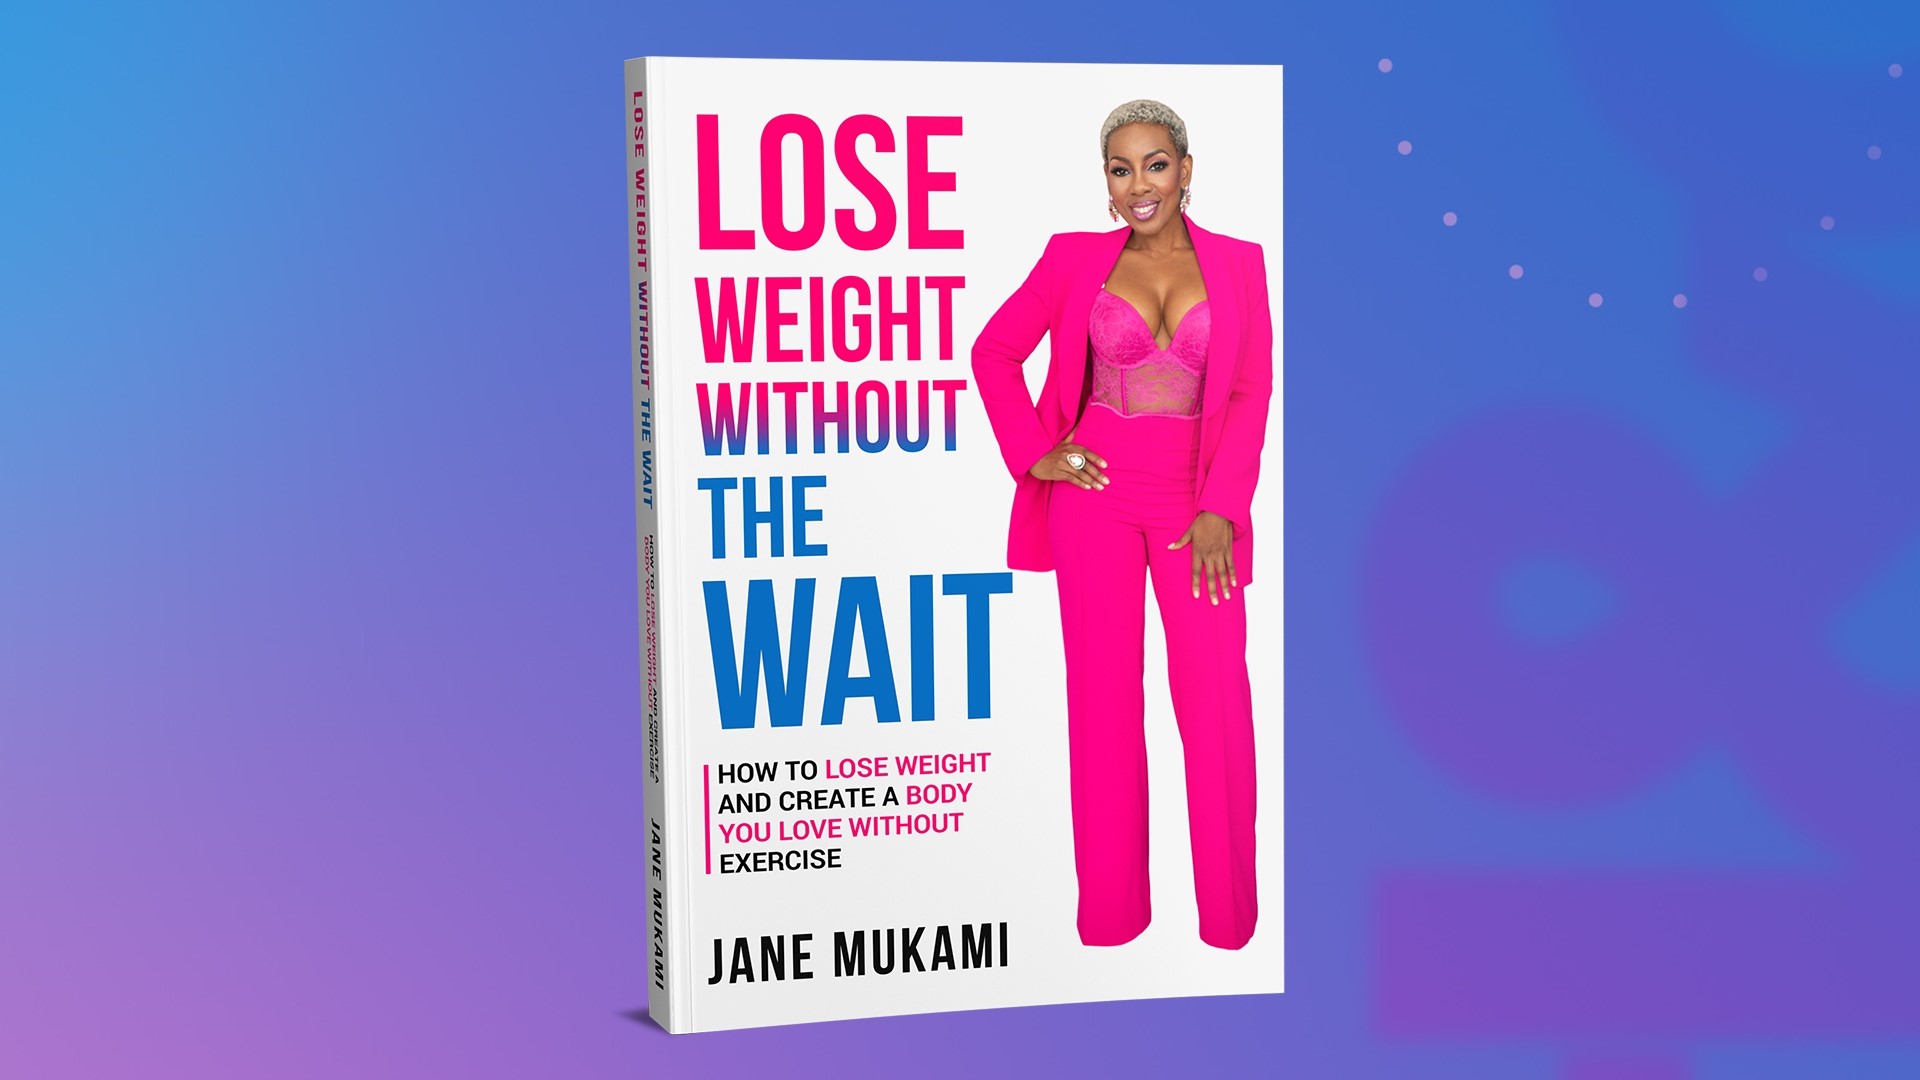 Get your copy of "Lose Weight Without the Wait" at LoseWeightWithoutTheWait.com